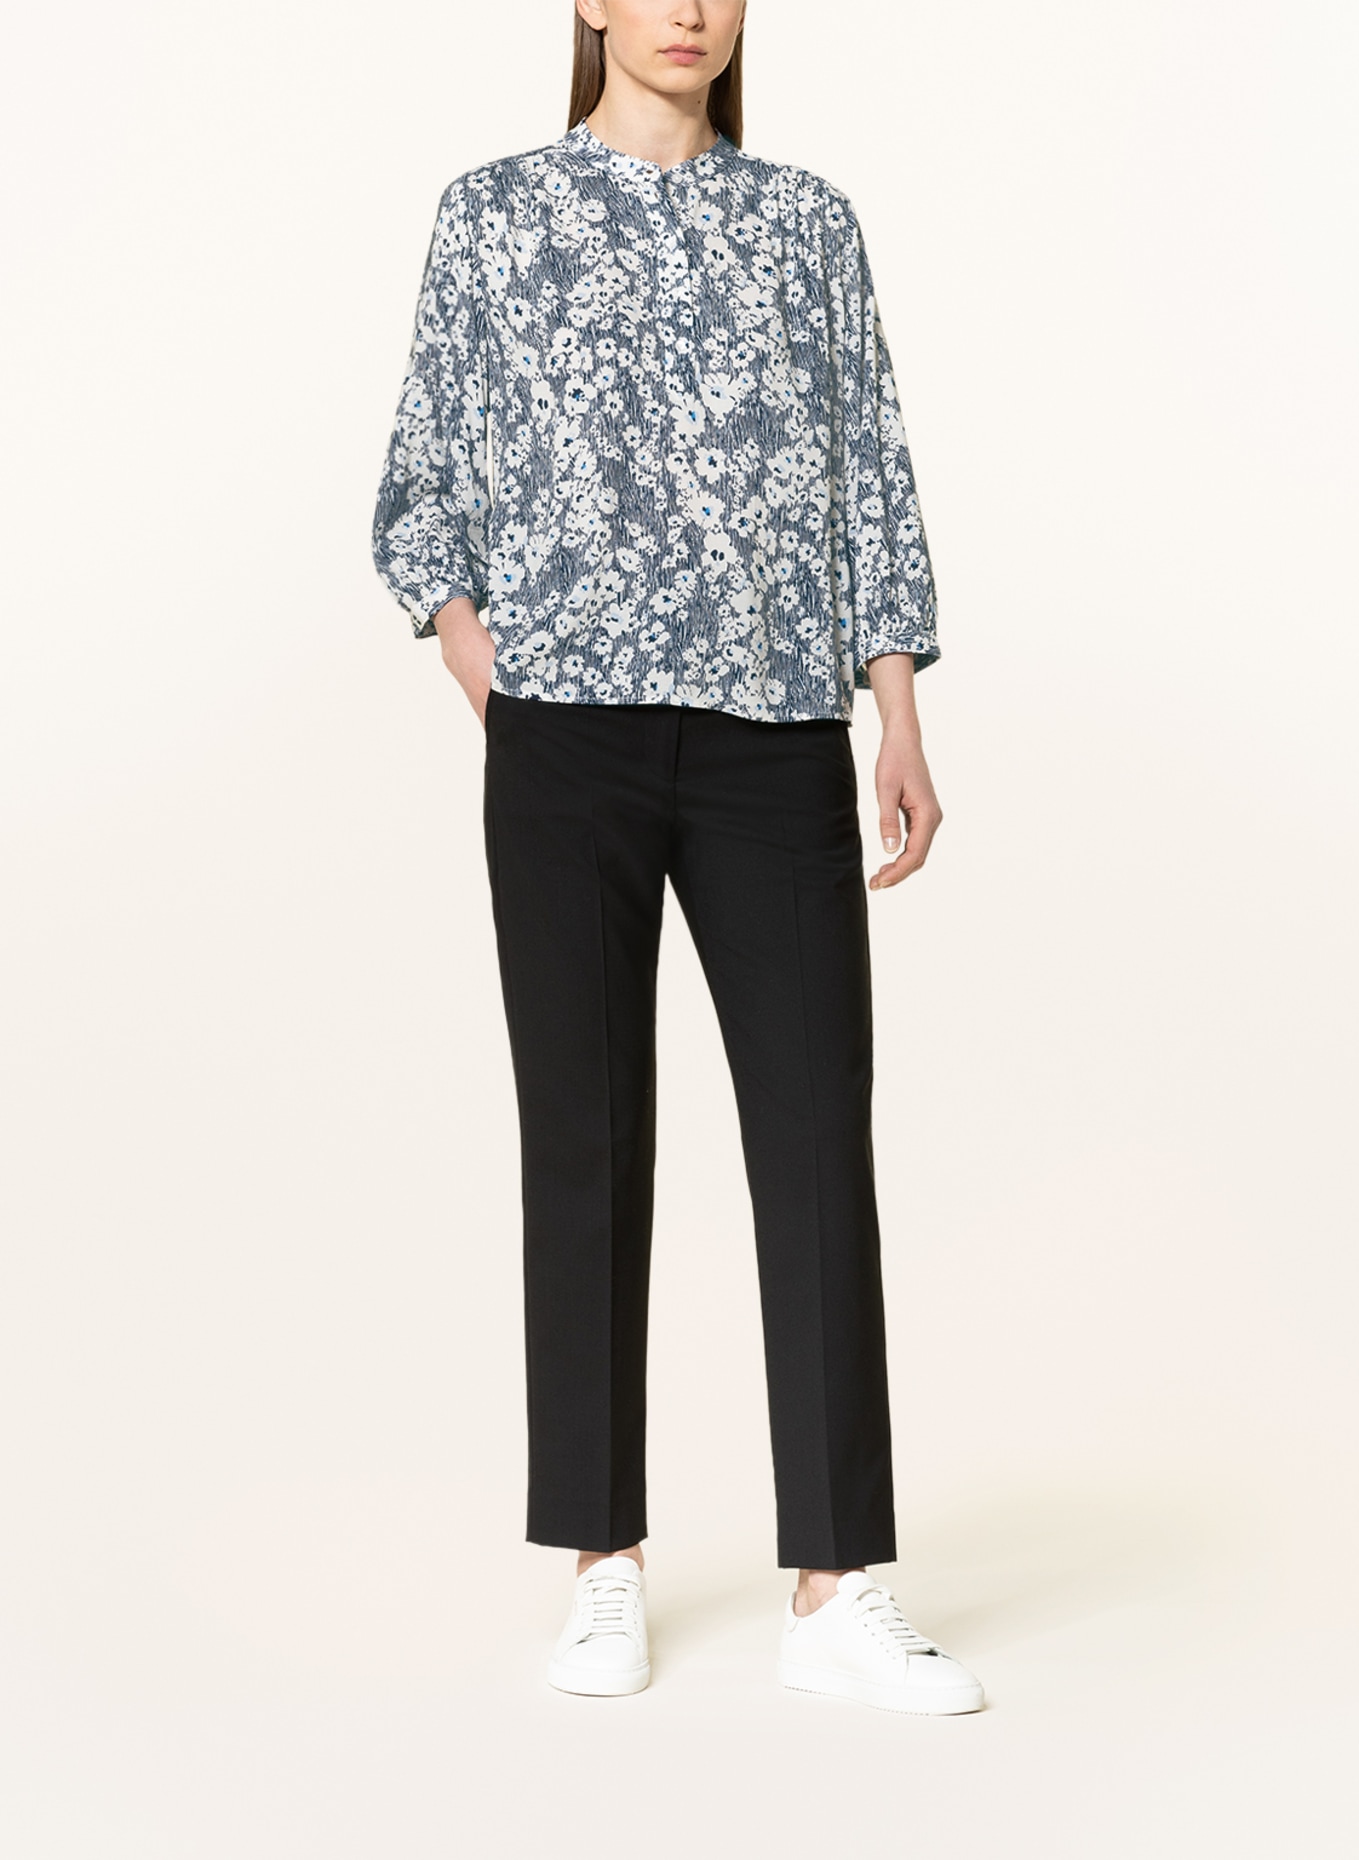 OPUS Shirt blouse FALINDO with 3/4 sleeves, Color: DARK BLUE/ WHITE (Image 2)